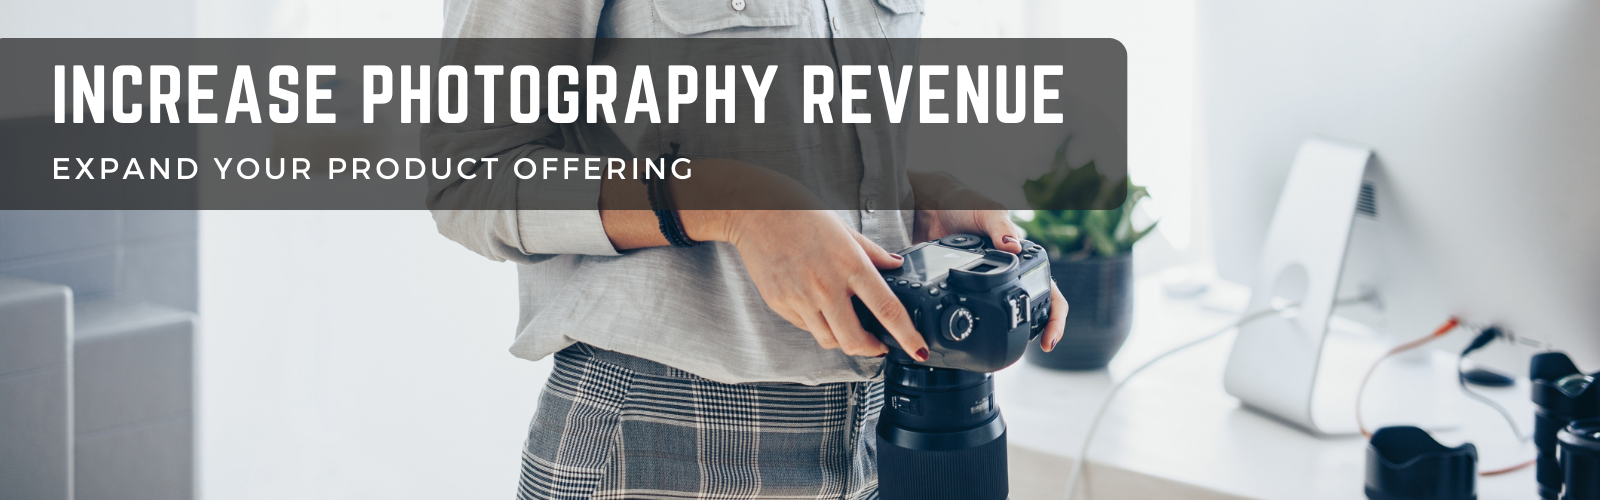 Increase Photography Business Revenue: Expanding Photo Printing Product Offering | Annex Photo by Fujifilm Toronto Canada 